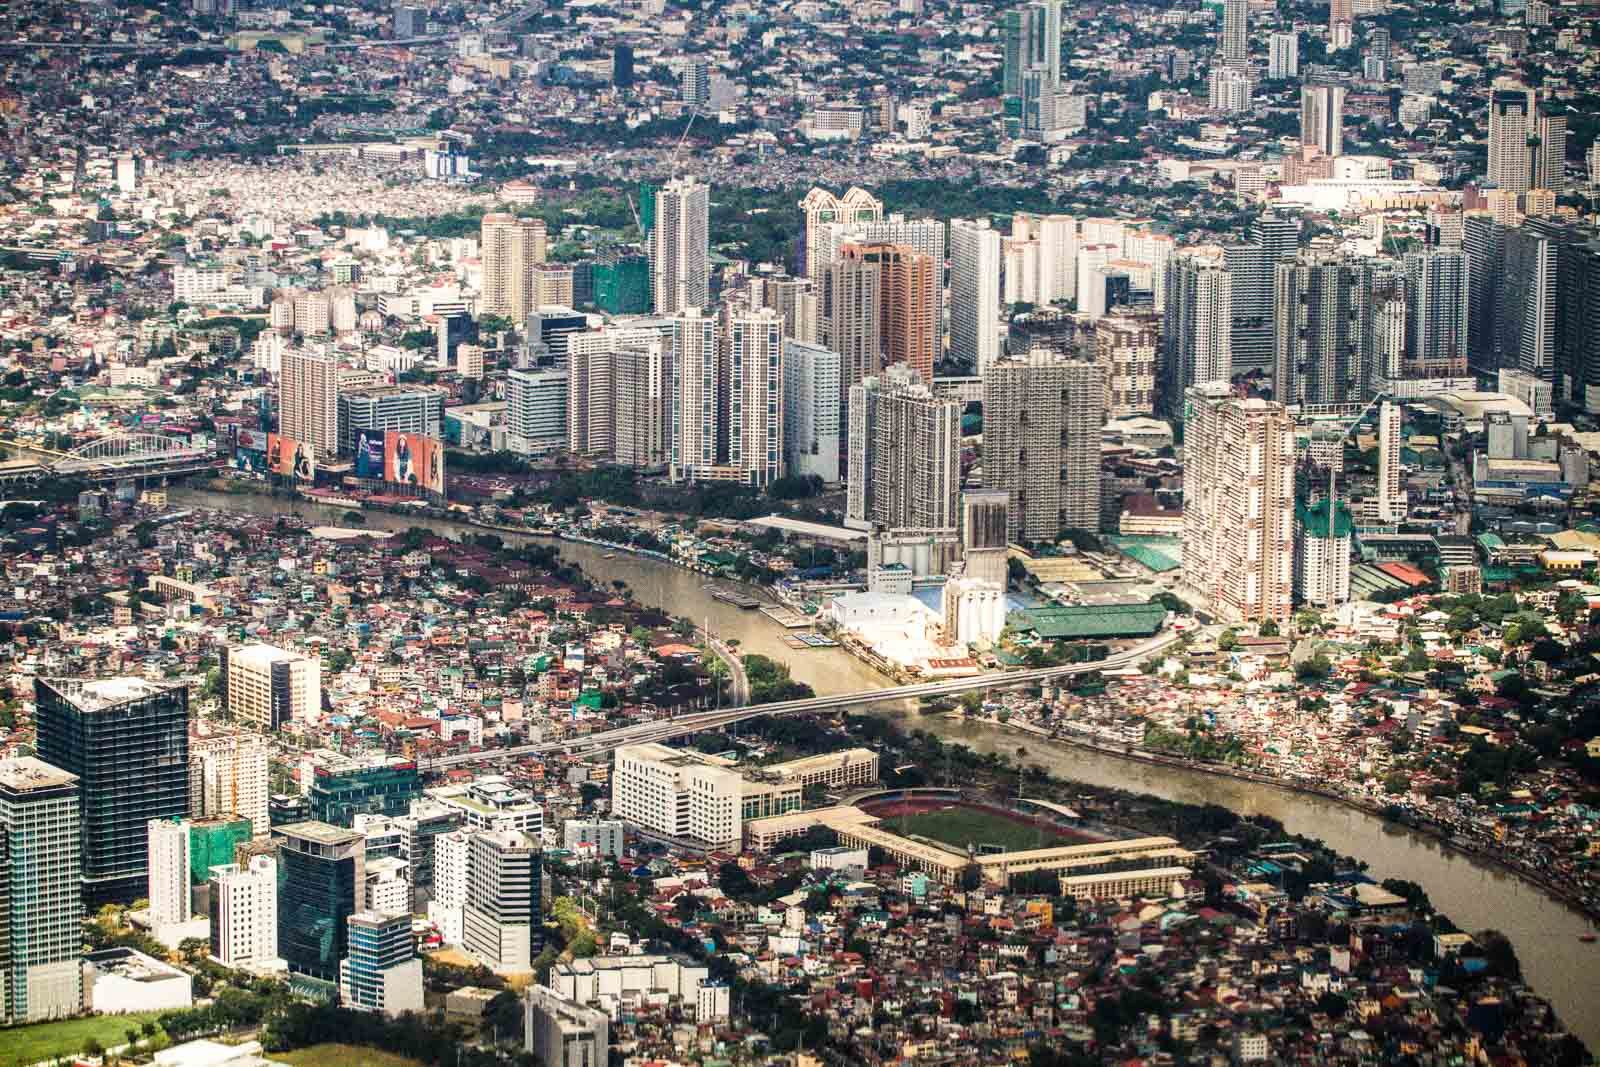 Philippines posts 7.6% GDP growth in Q3 2022, beating estimates